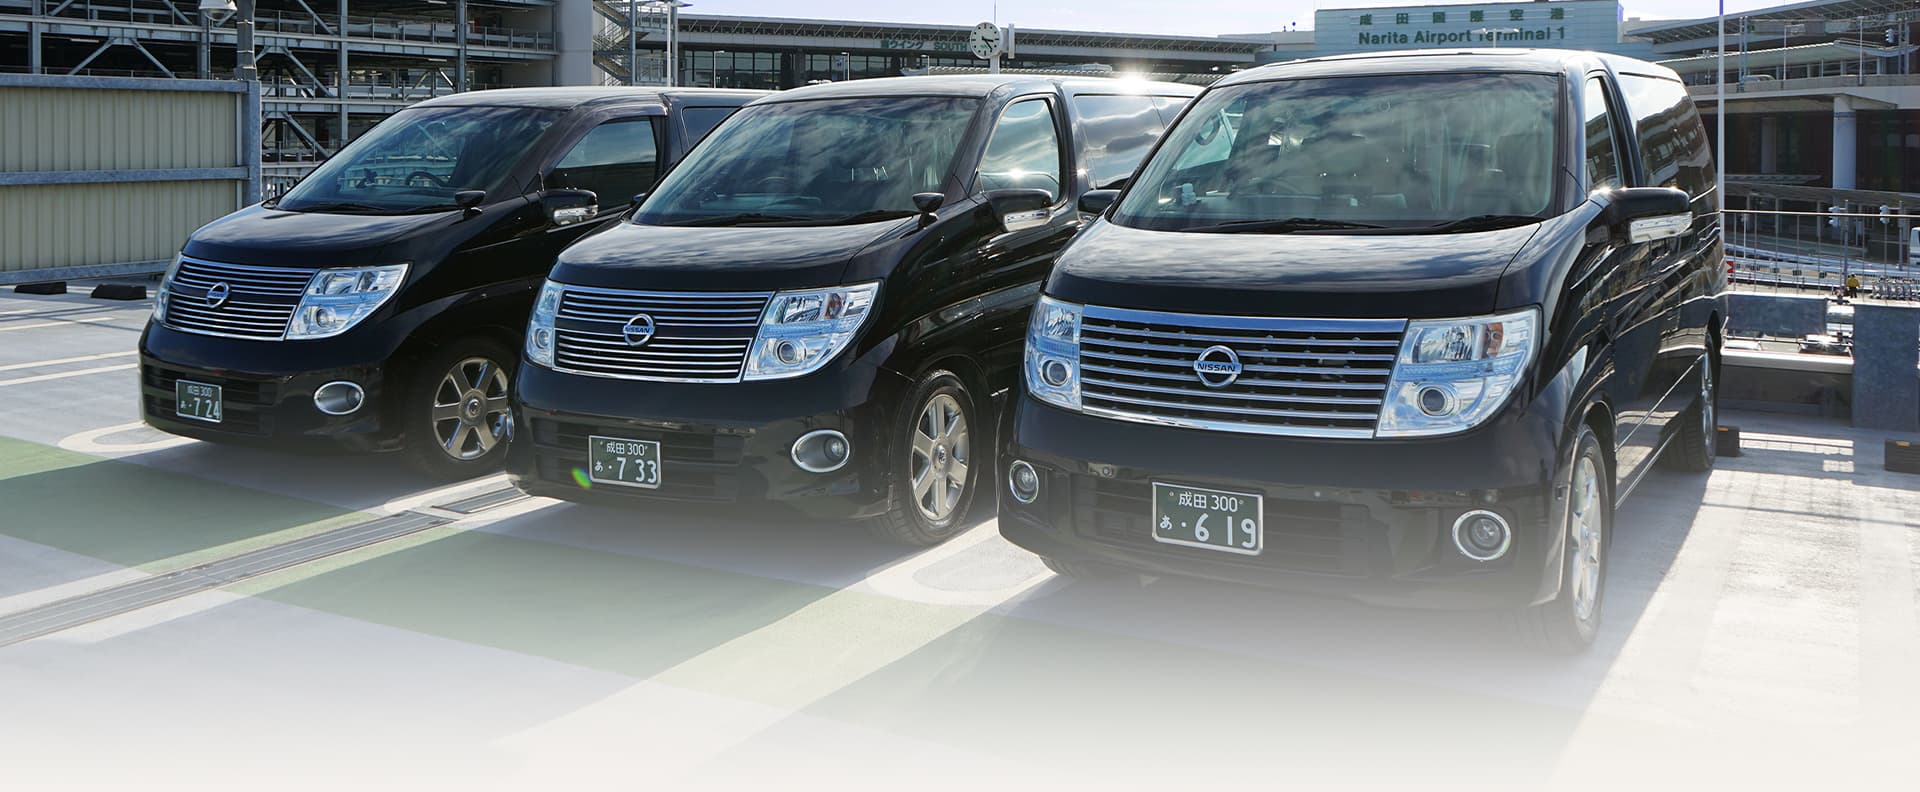 Hire cars that meet the standards of Japan's Ministry of Health, Labor and Welfare